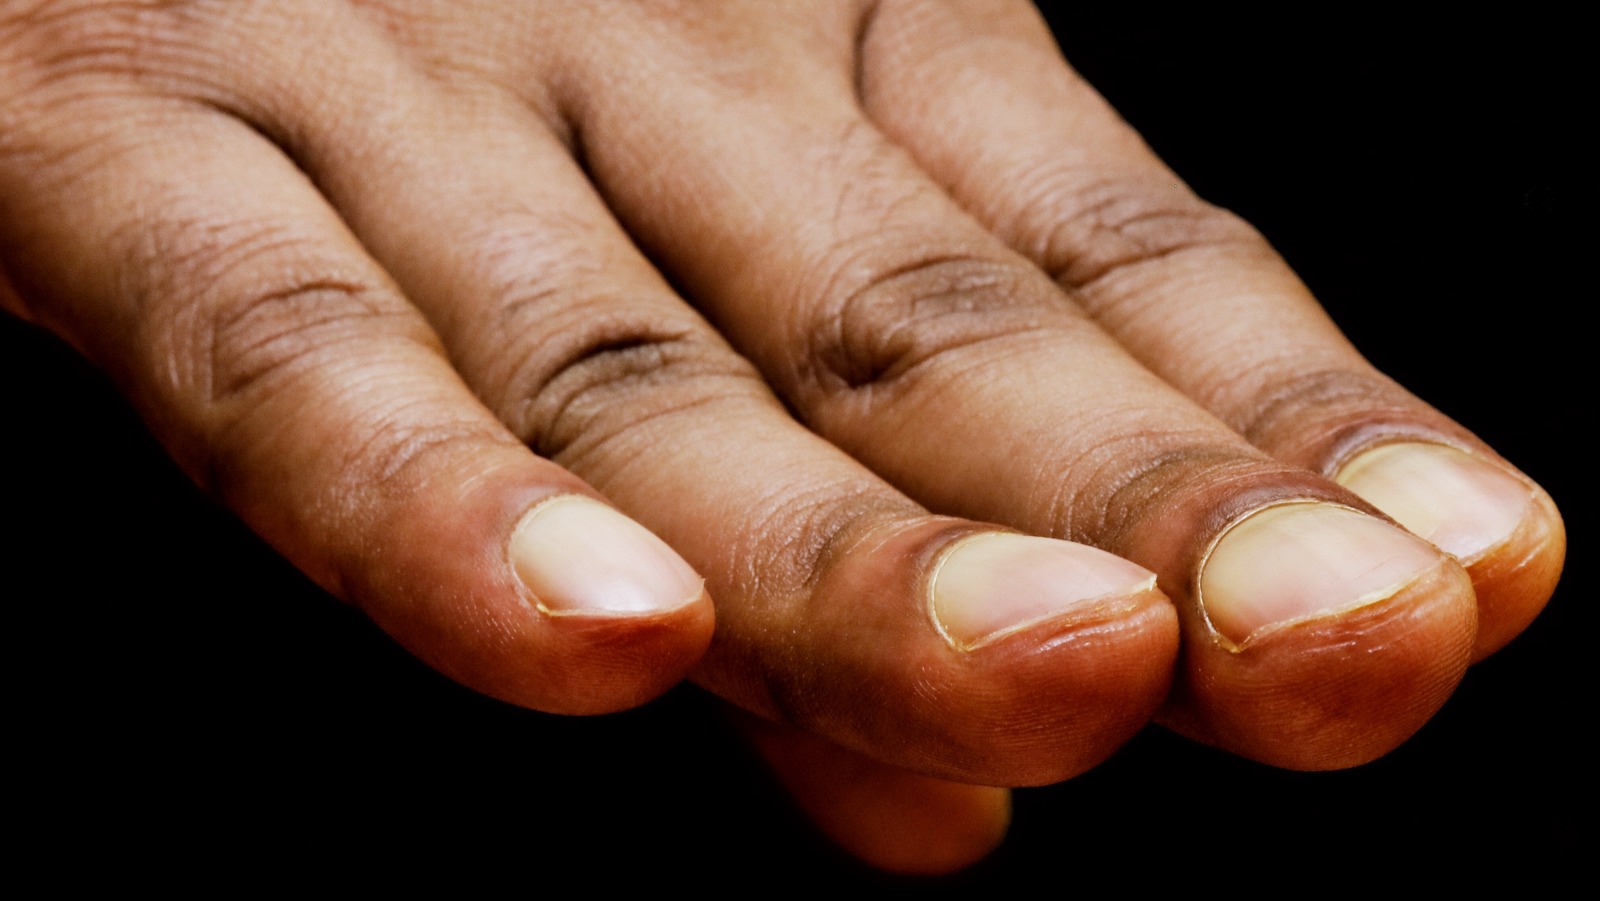 11 Nail Conditions for Which You Should Consult a Dermatologist